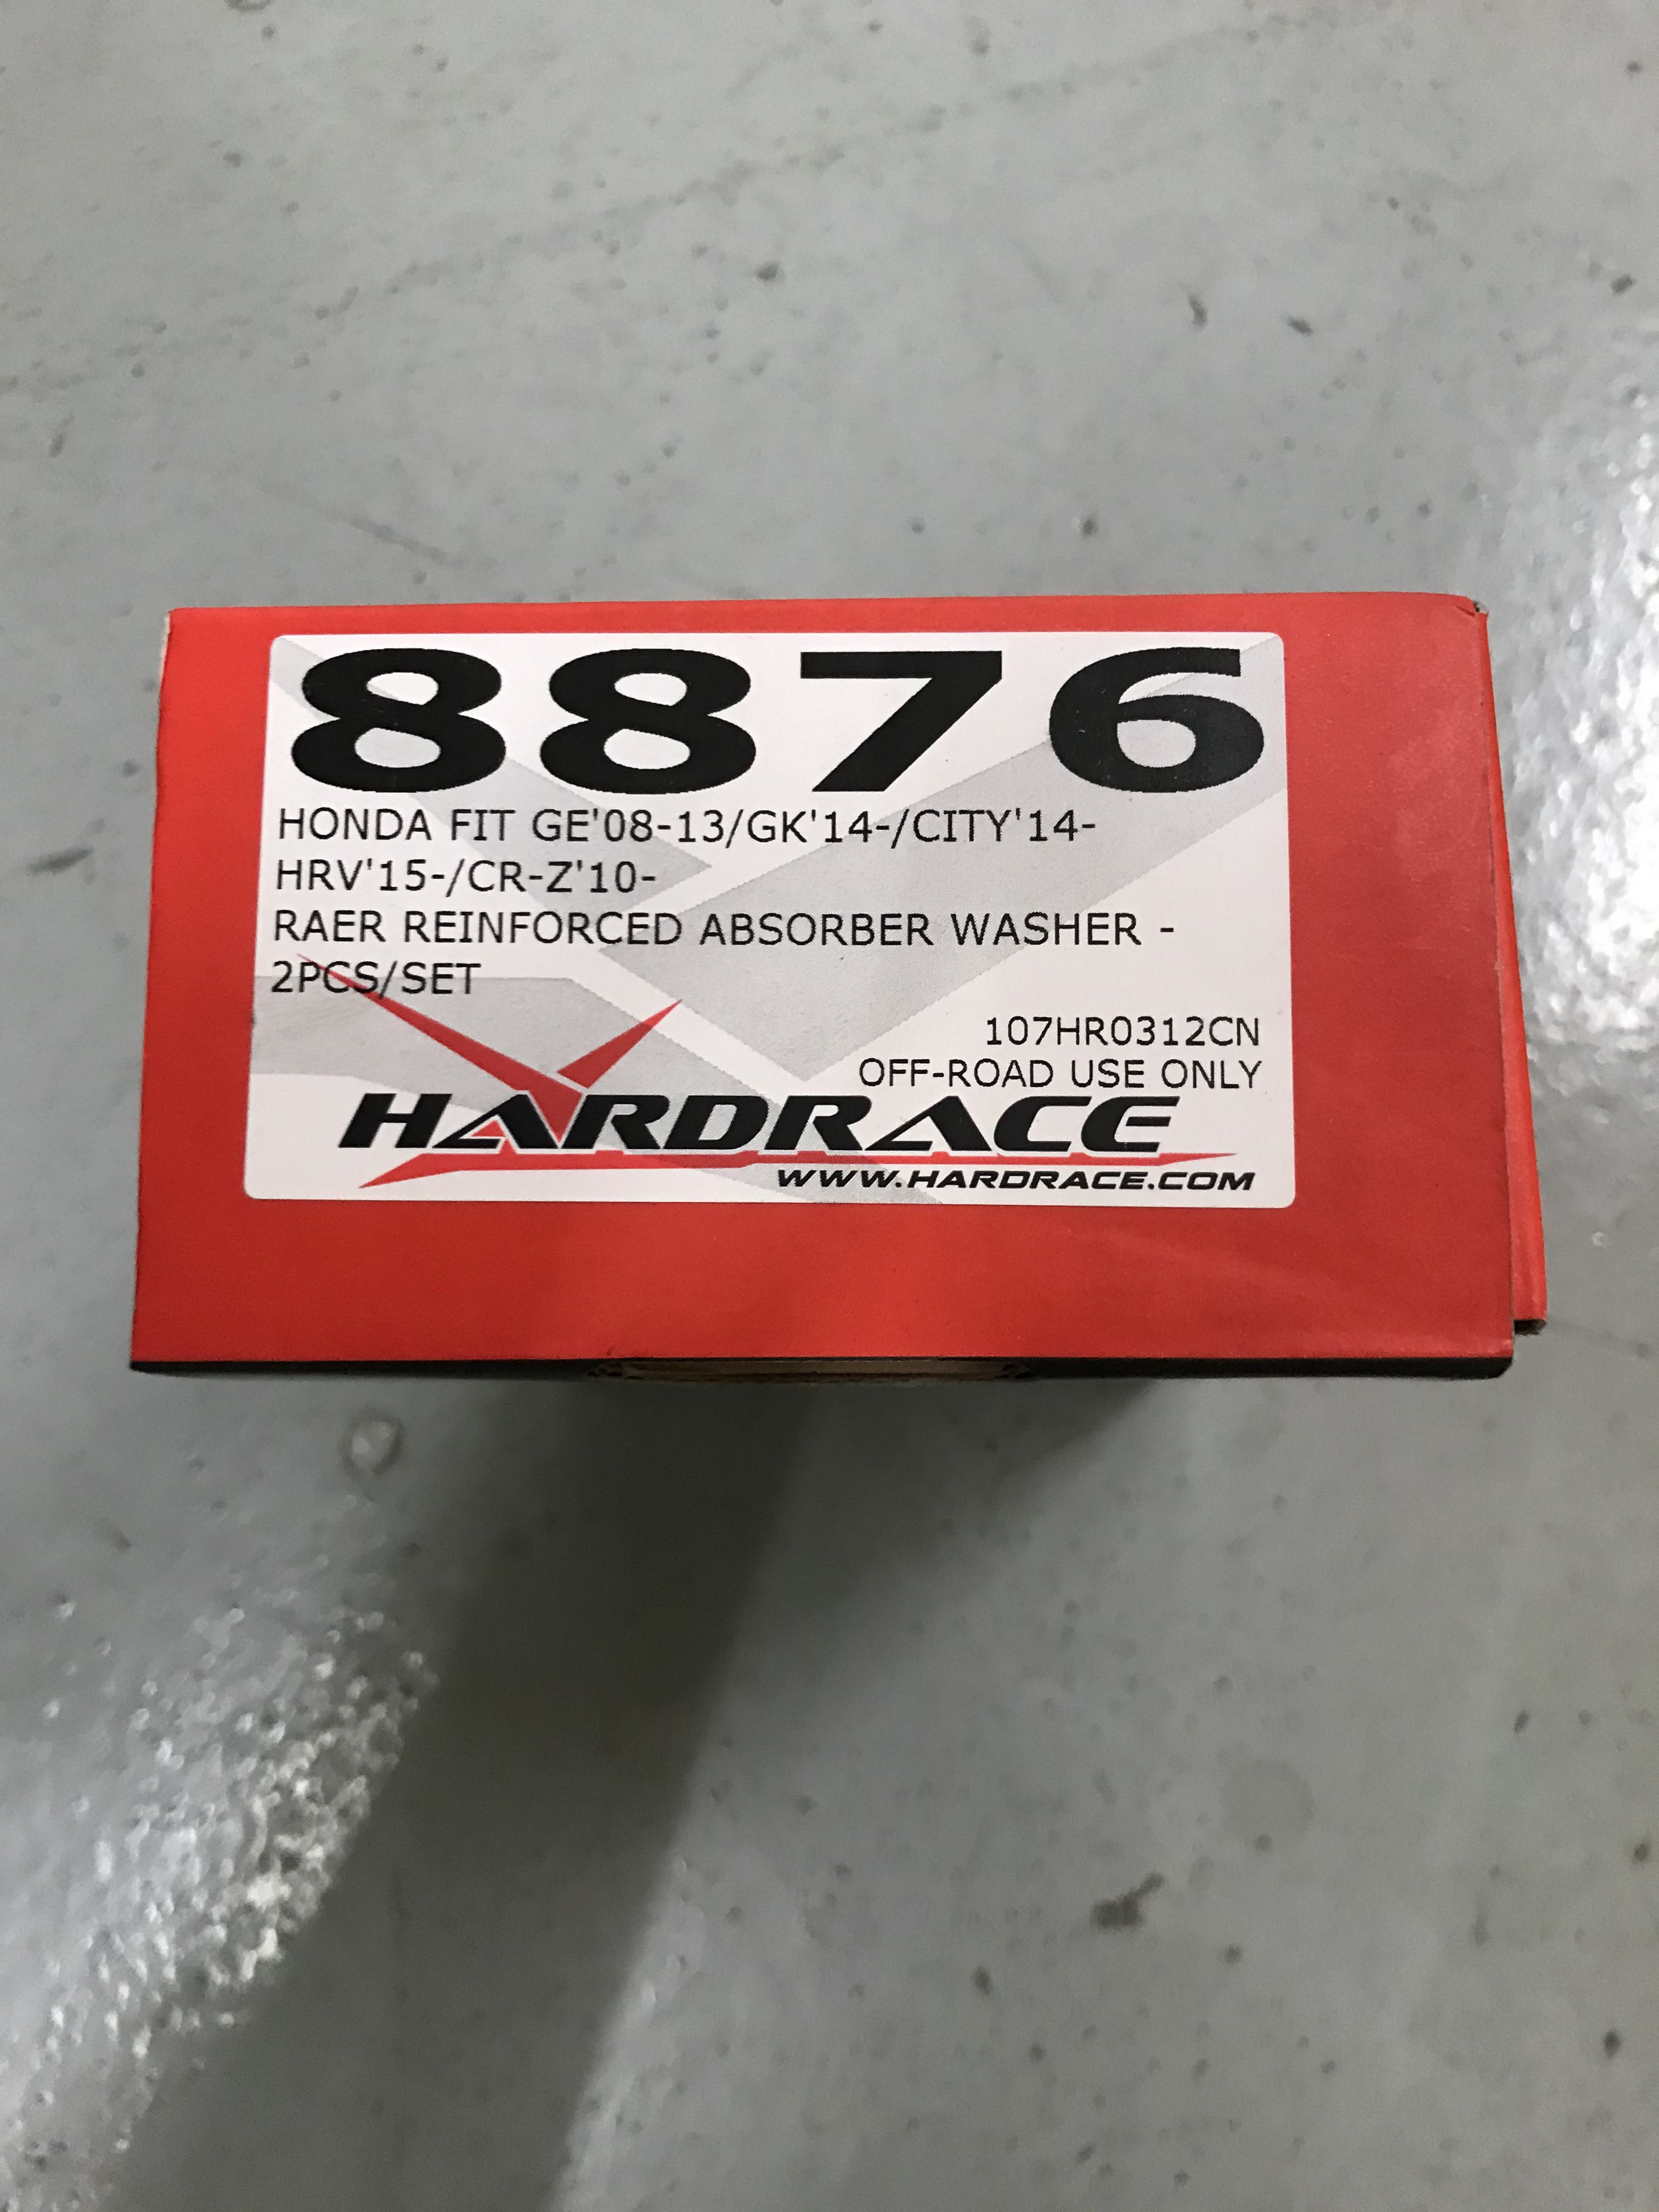 Honda Fit Hrv City Cr Z Hardrace Rear Absorber Washer Car Accessories Accessories On Carousell